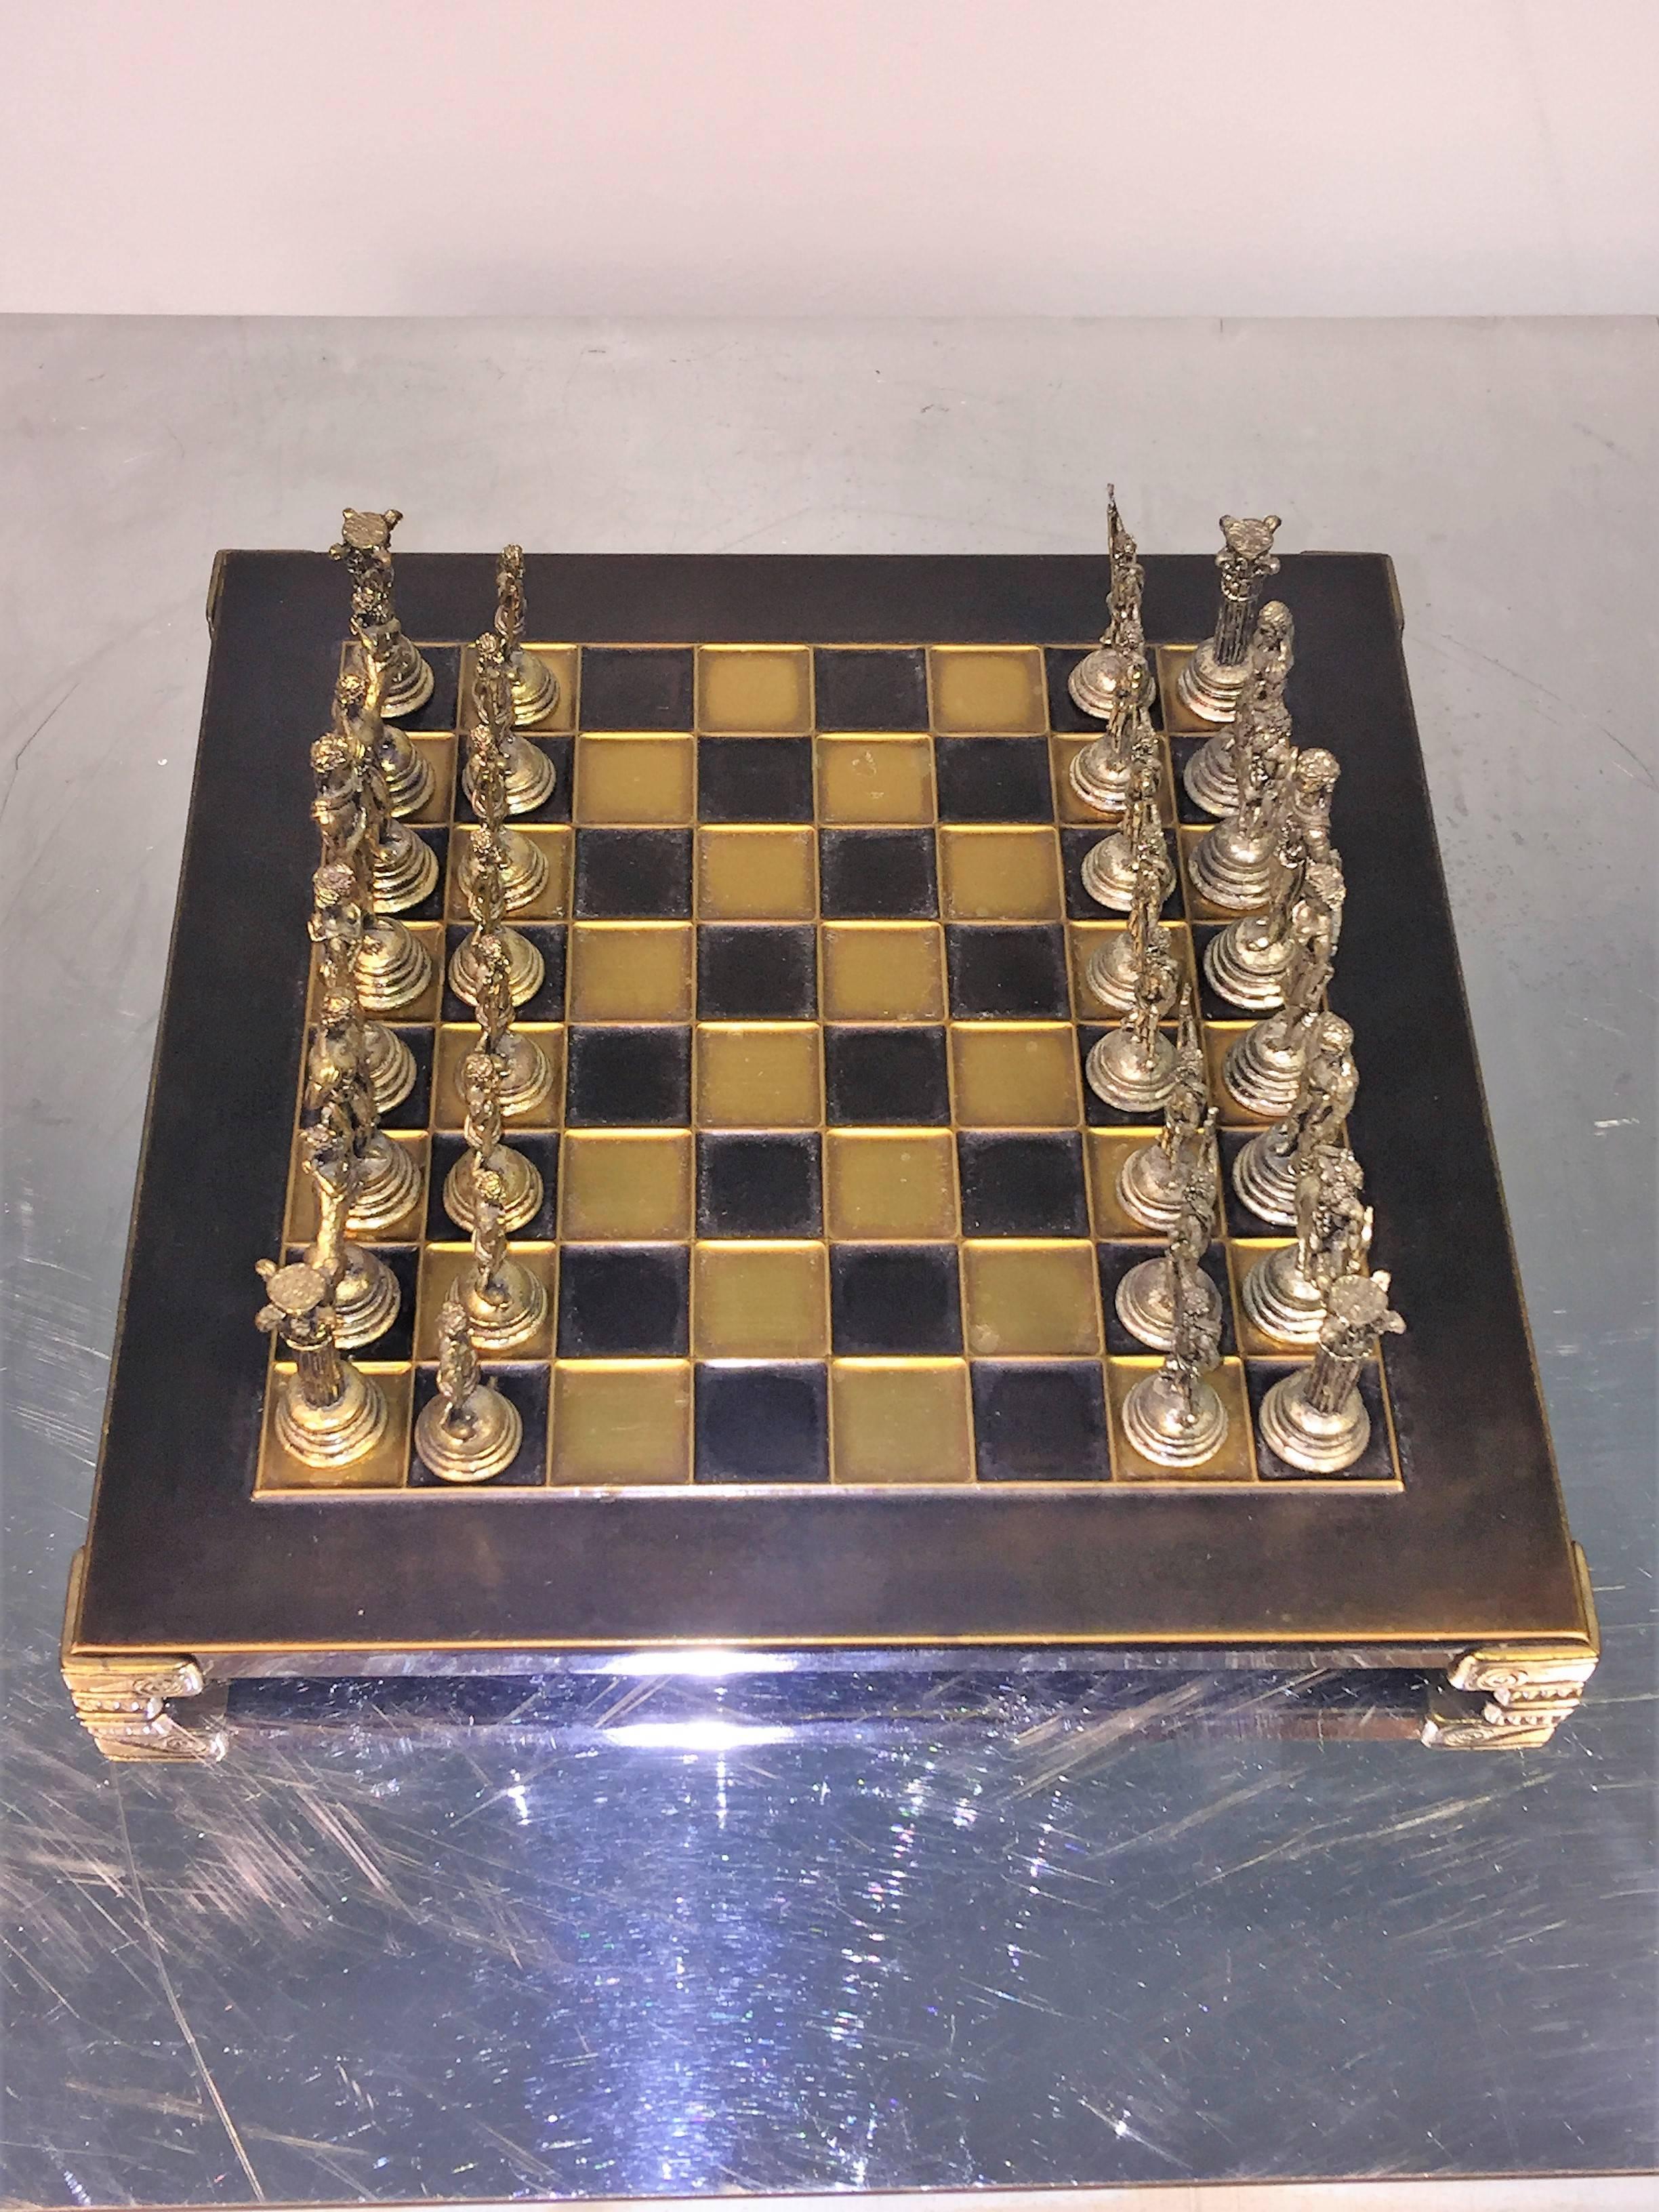 Great cast metal chess pieces in antiqued silver and brass on two-tone chess board. The chess board measures at 4